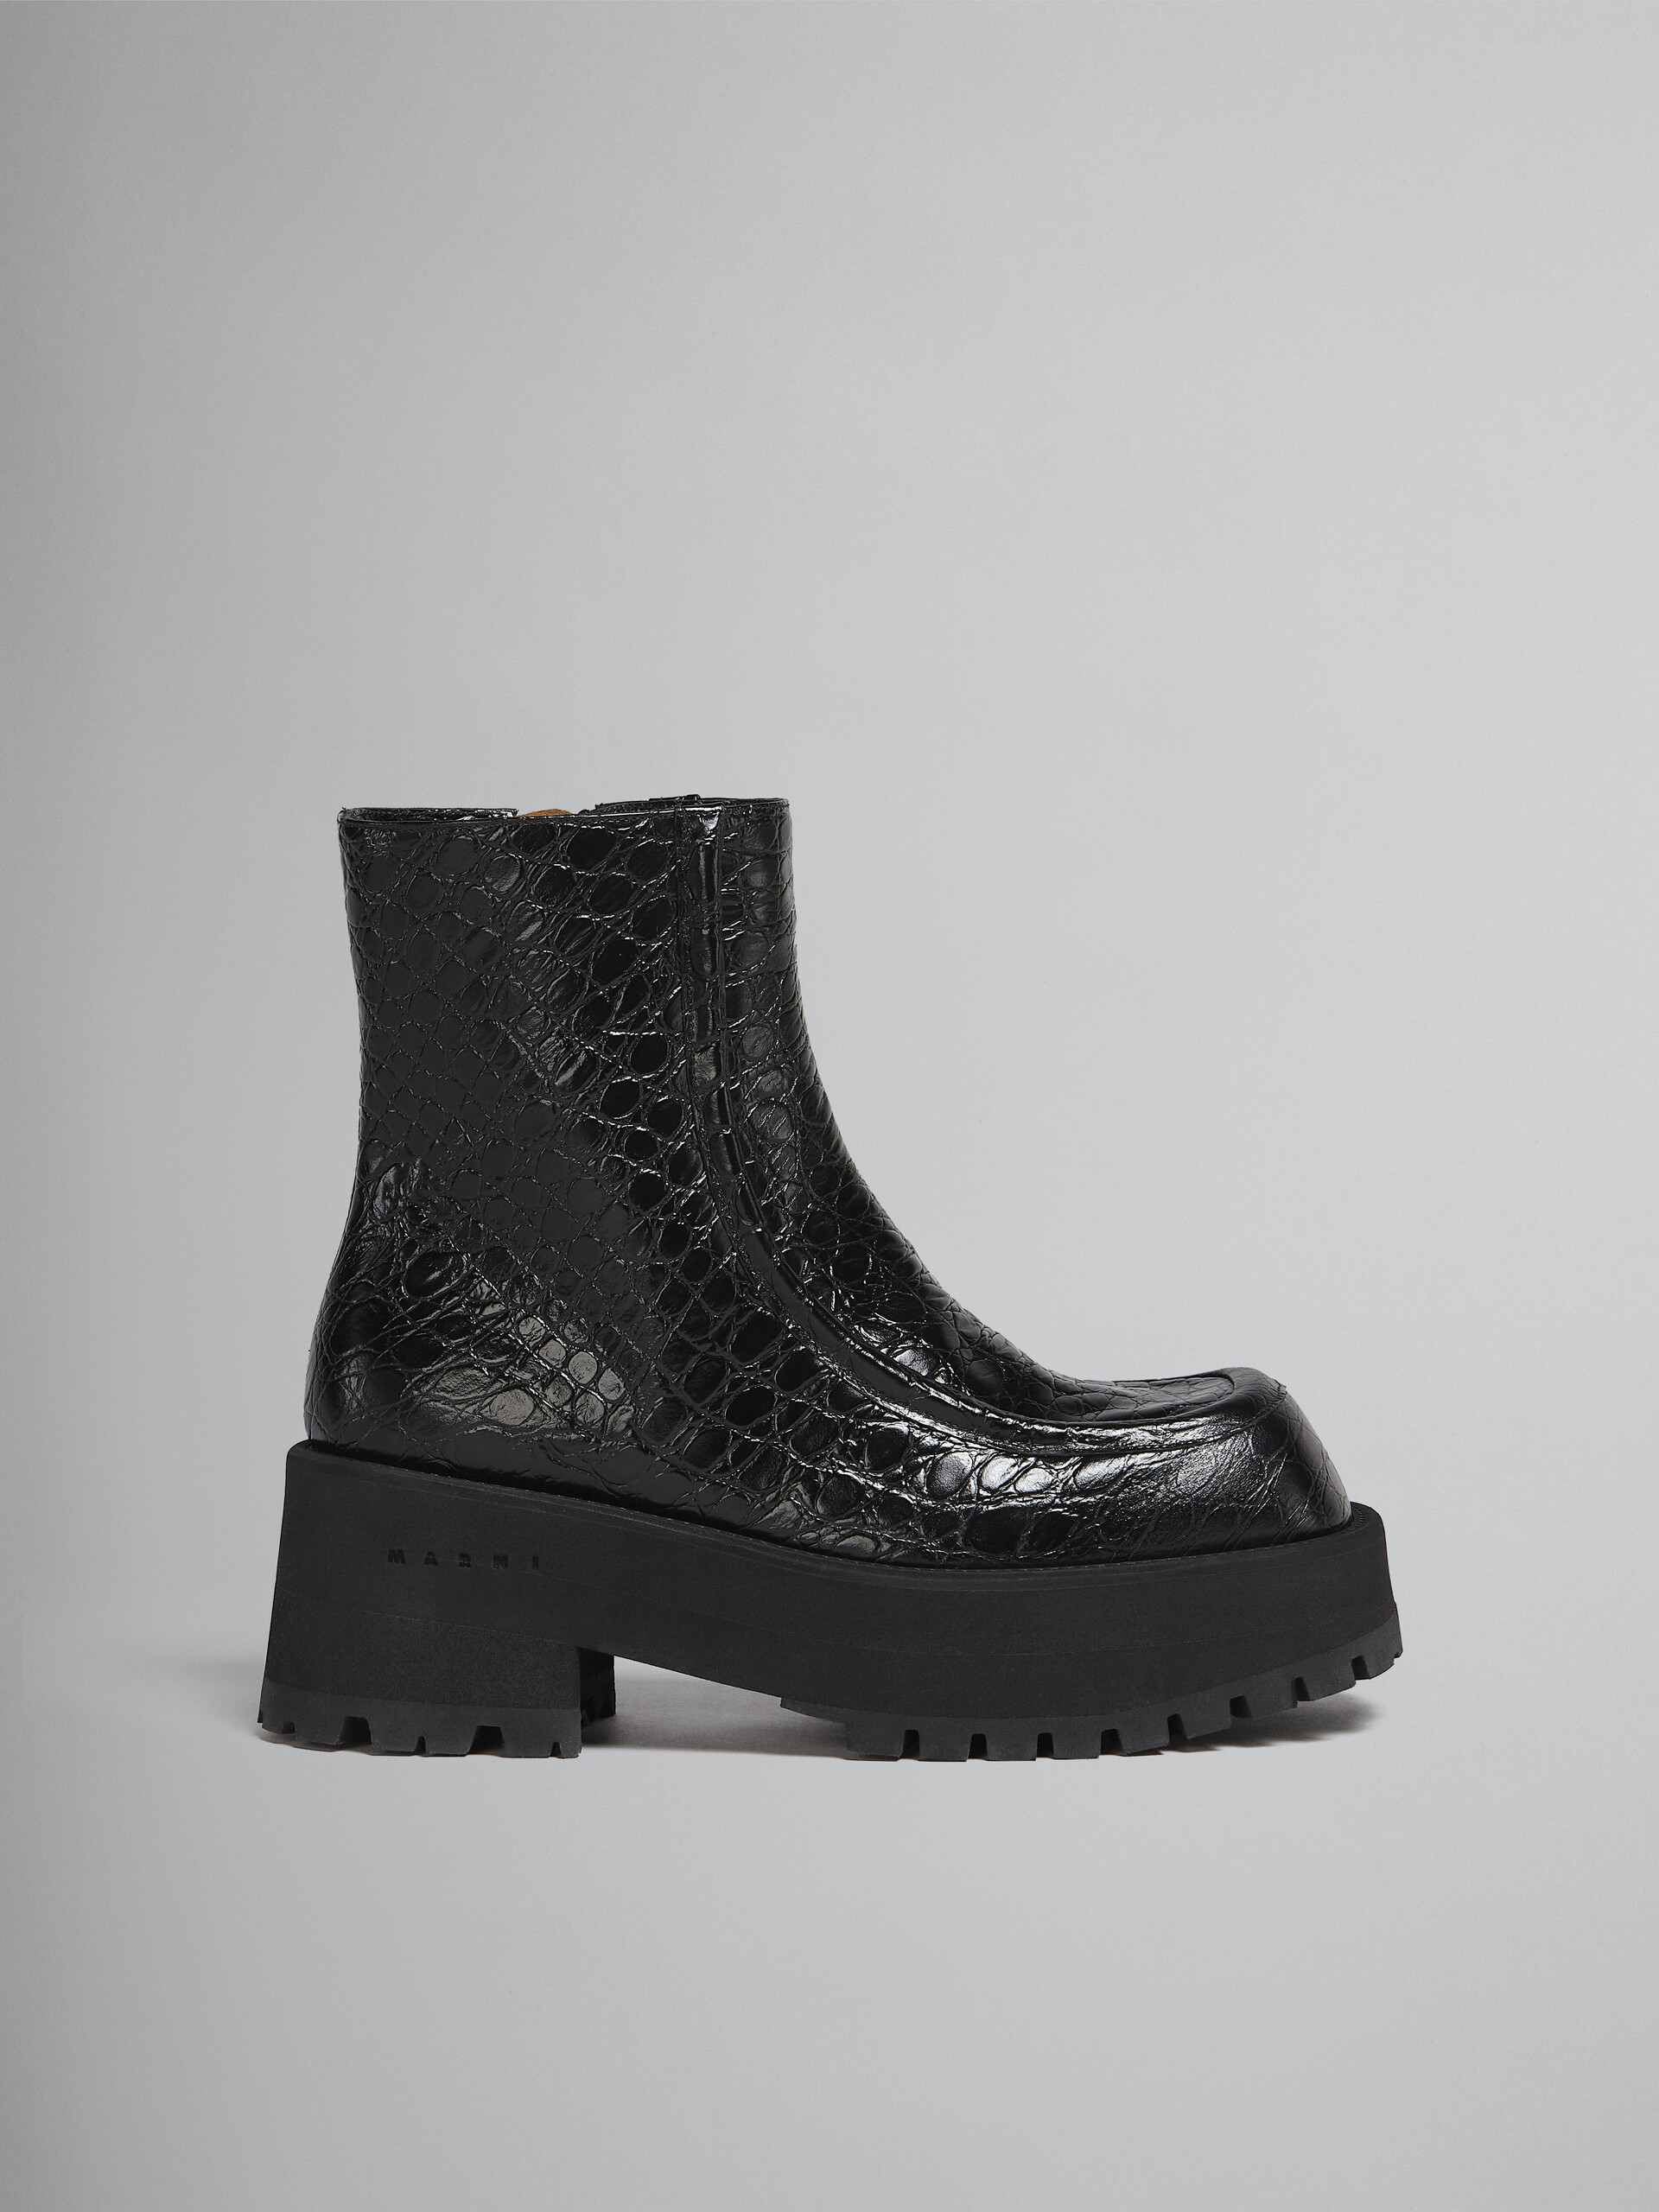 Ankle boot in black croco print leather - Boots - Image 1